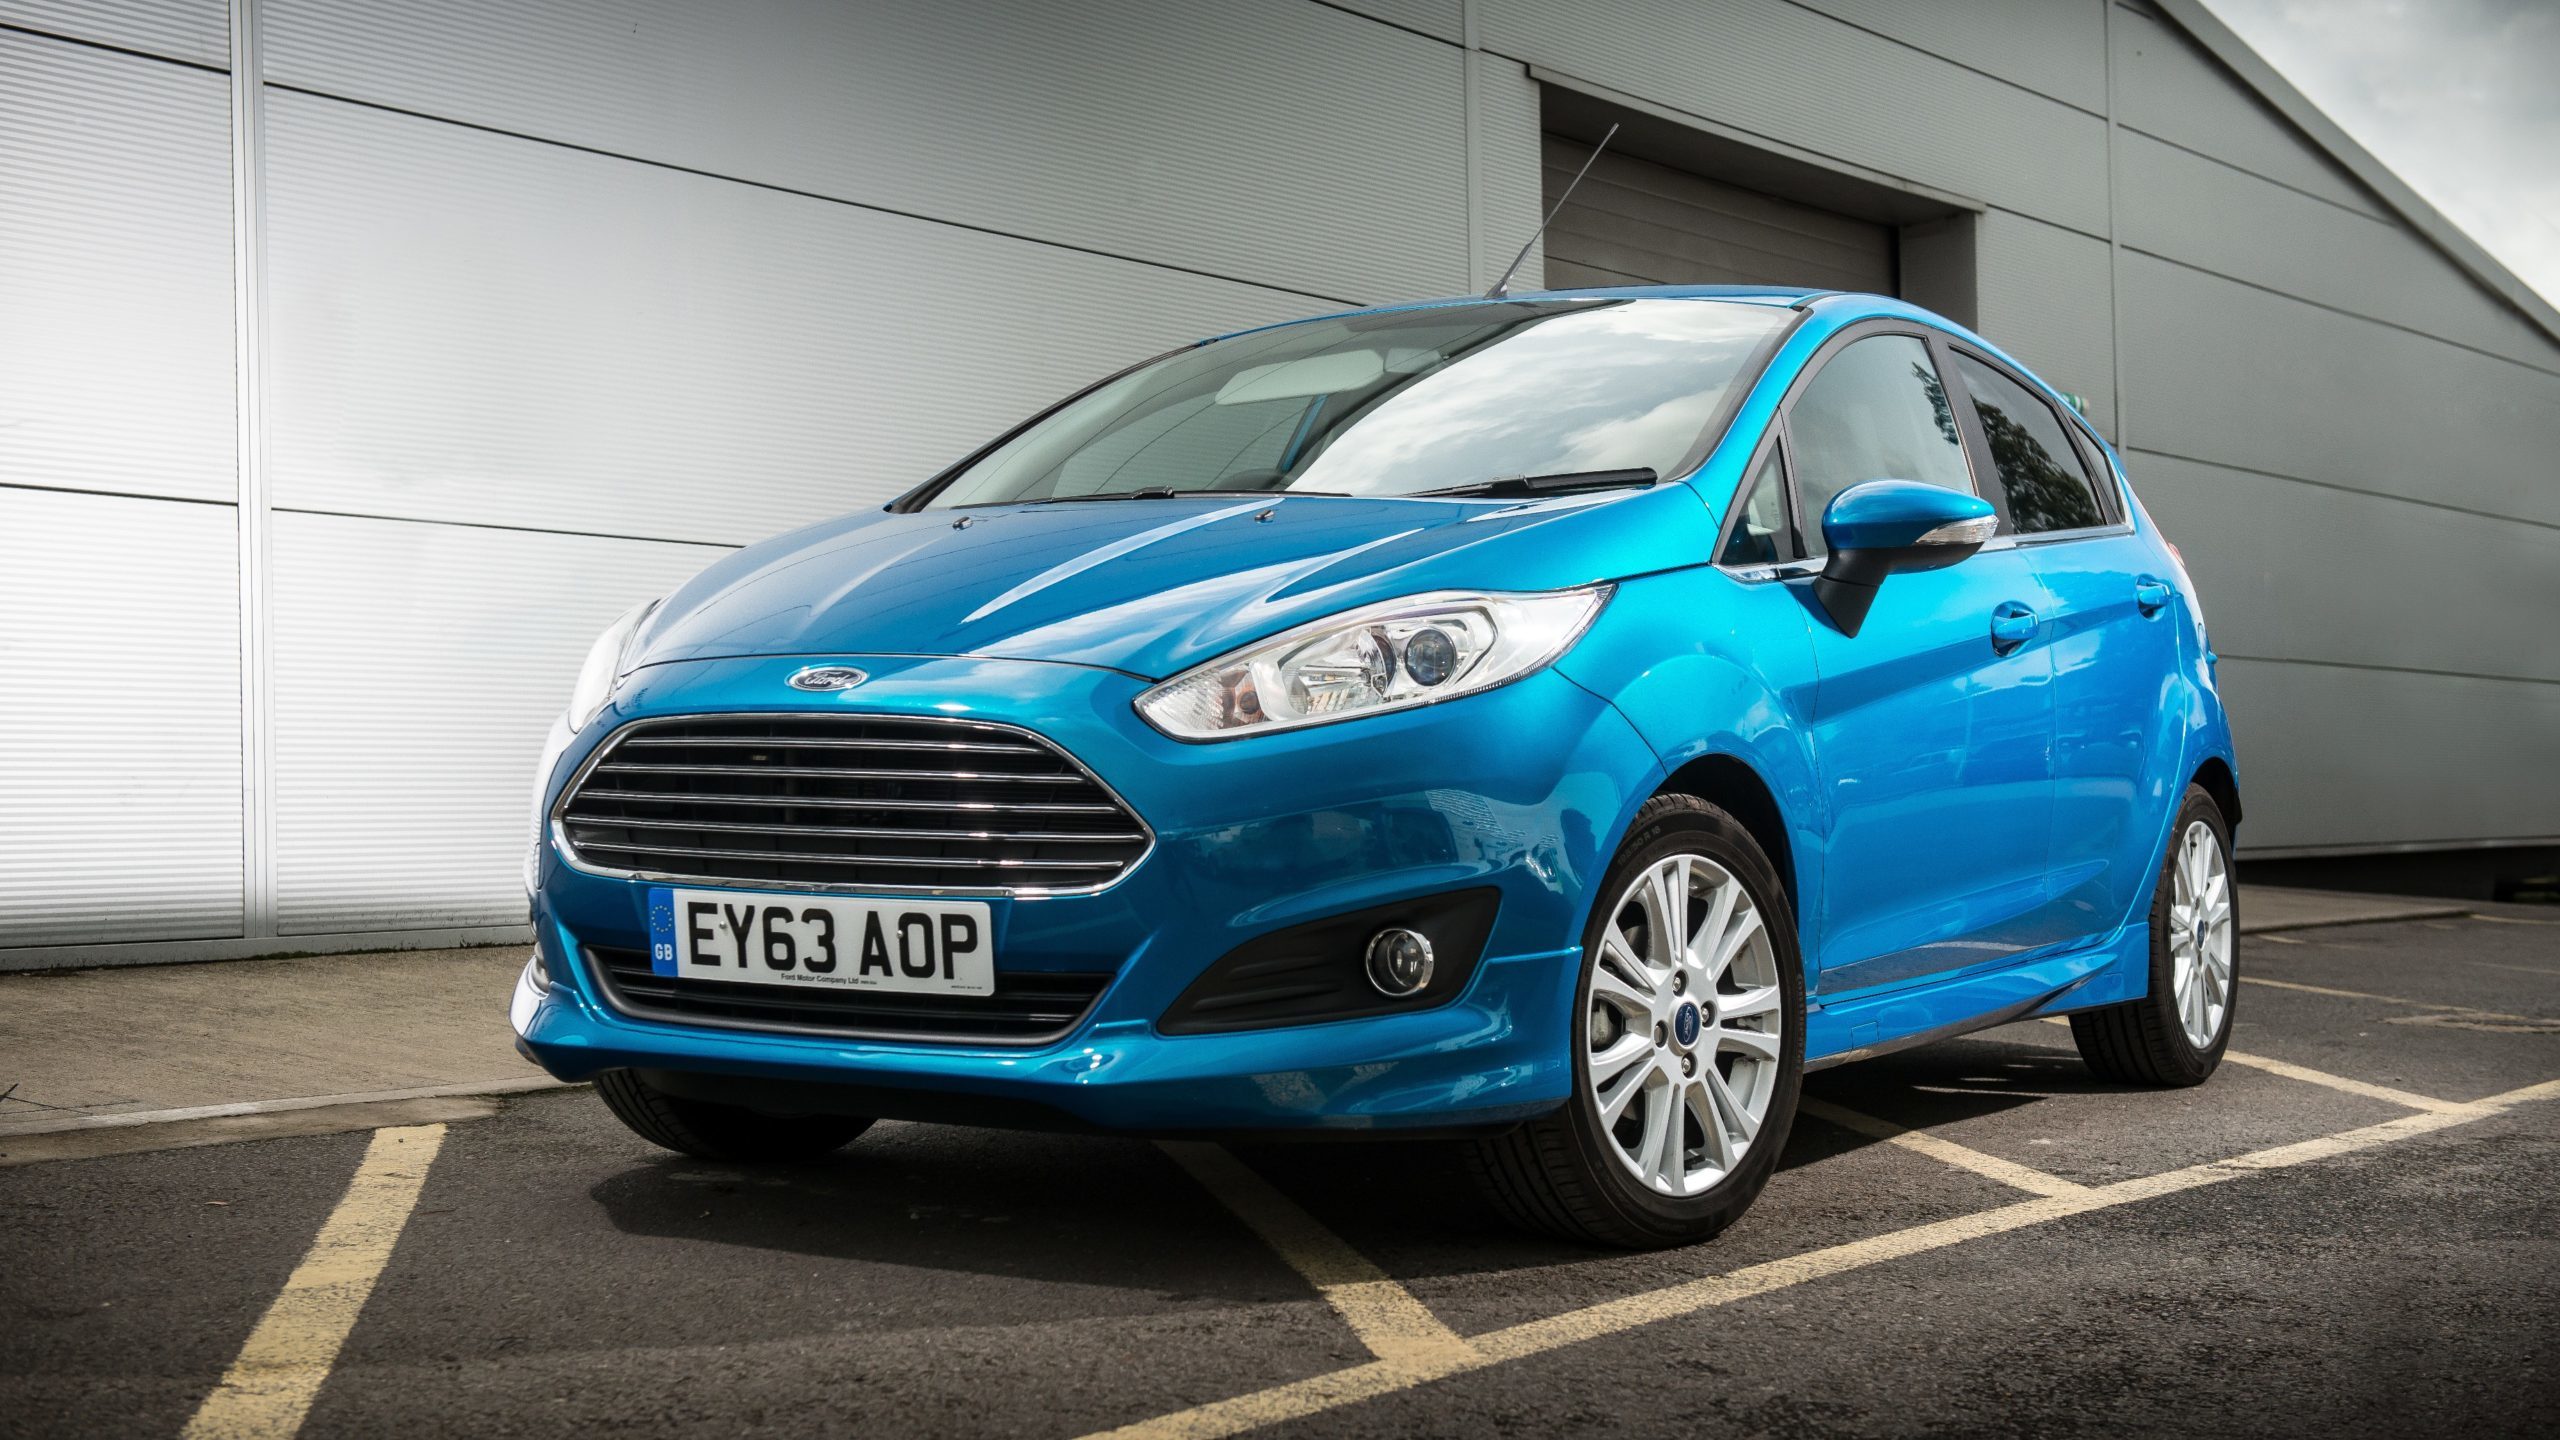 2014 Ford Fiesta Rating - The Car Guide